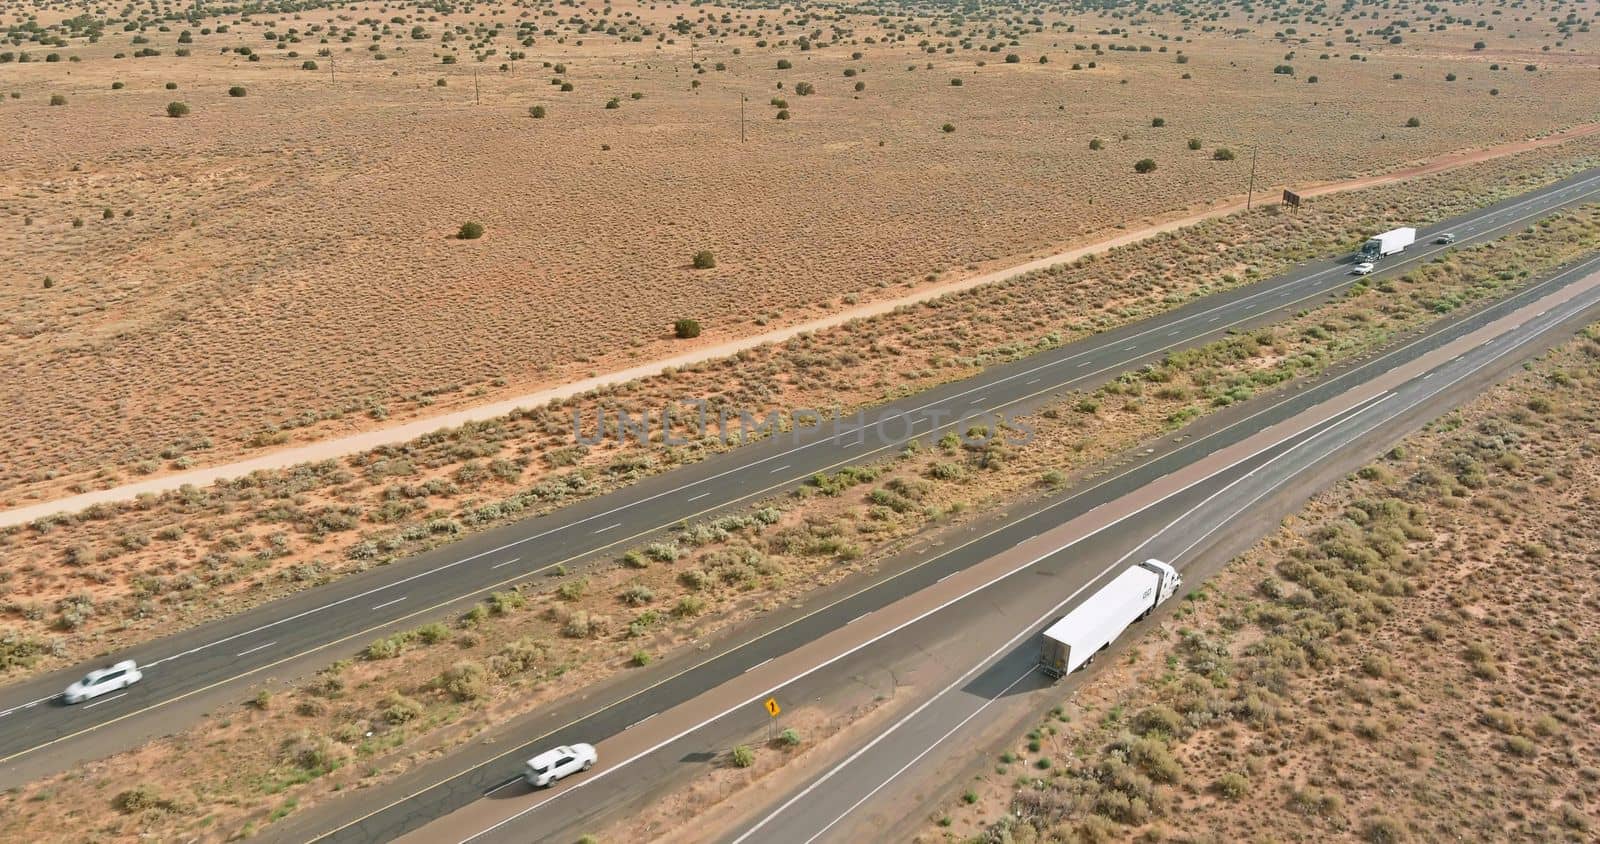 This is panorama of highway in America that is located an desert environment near San Jon United States of America.